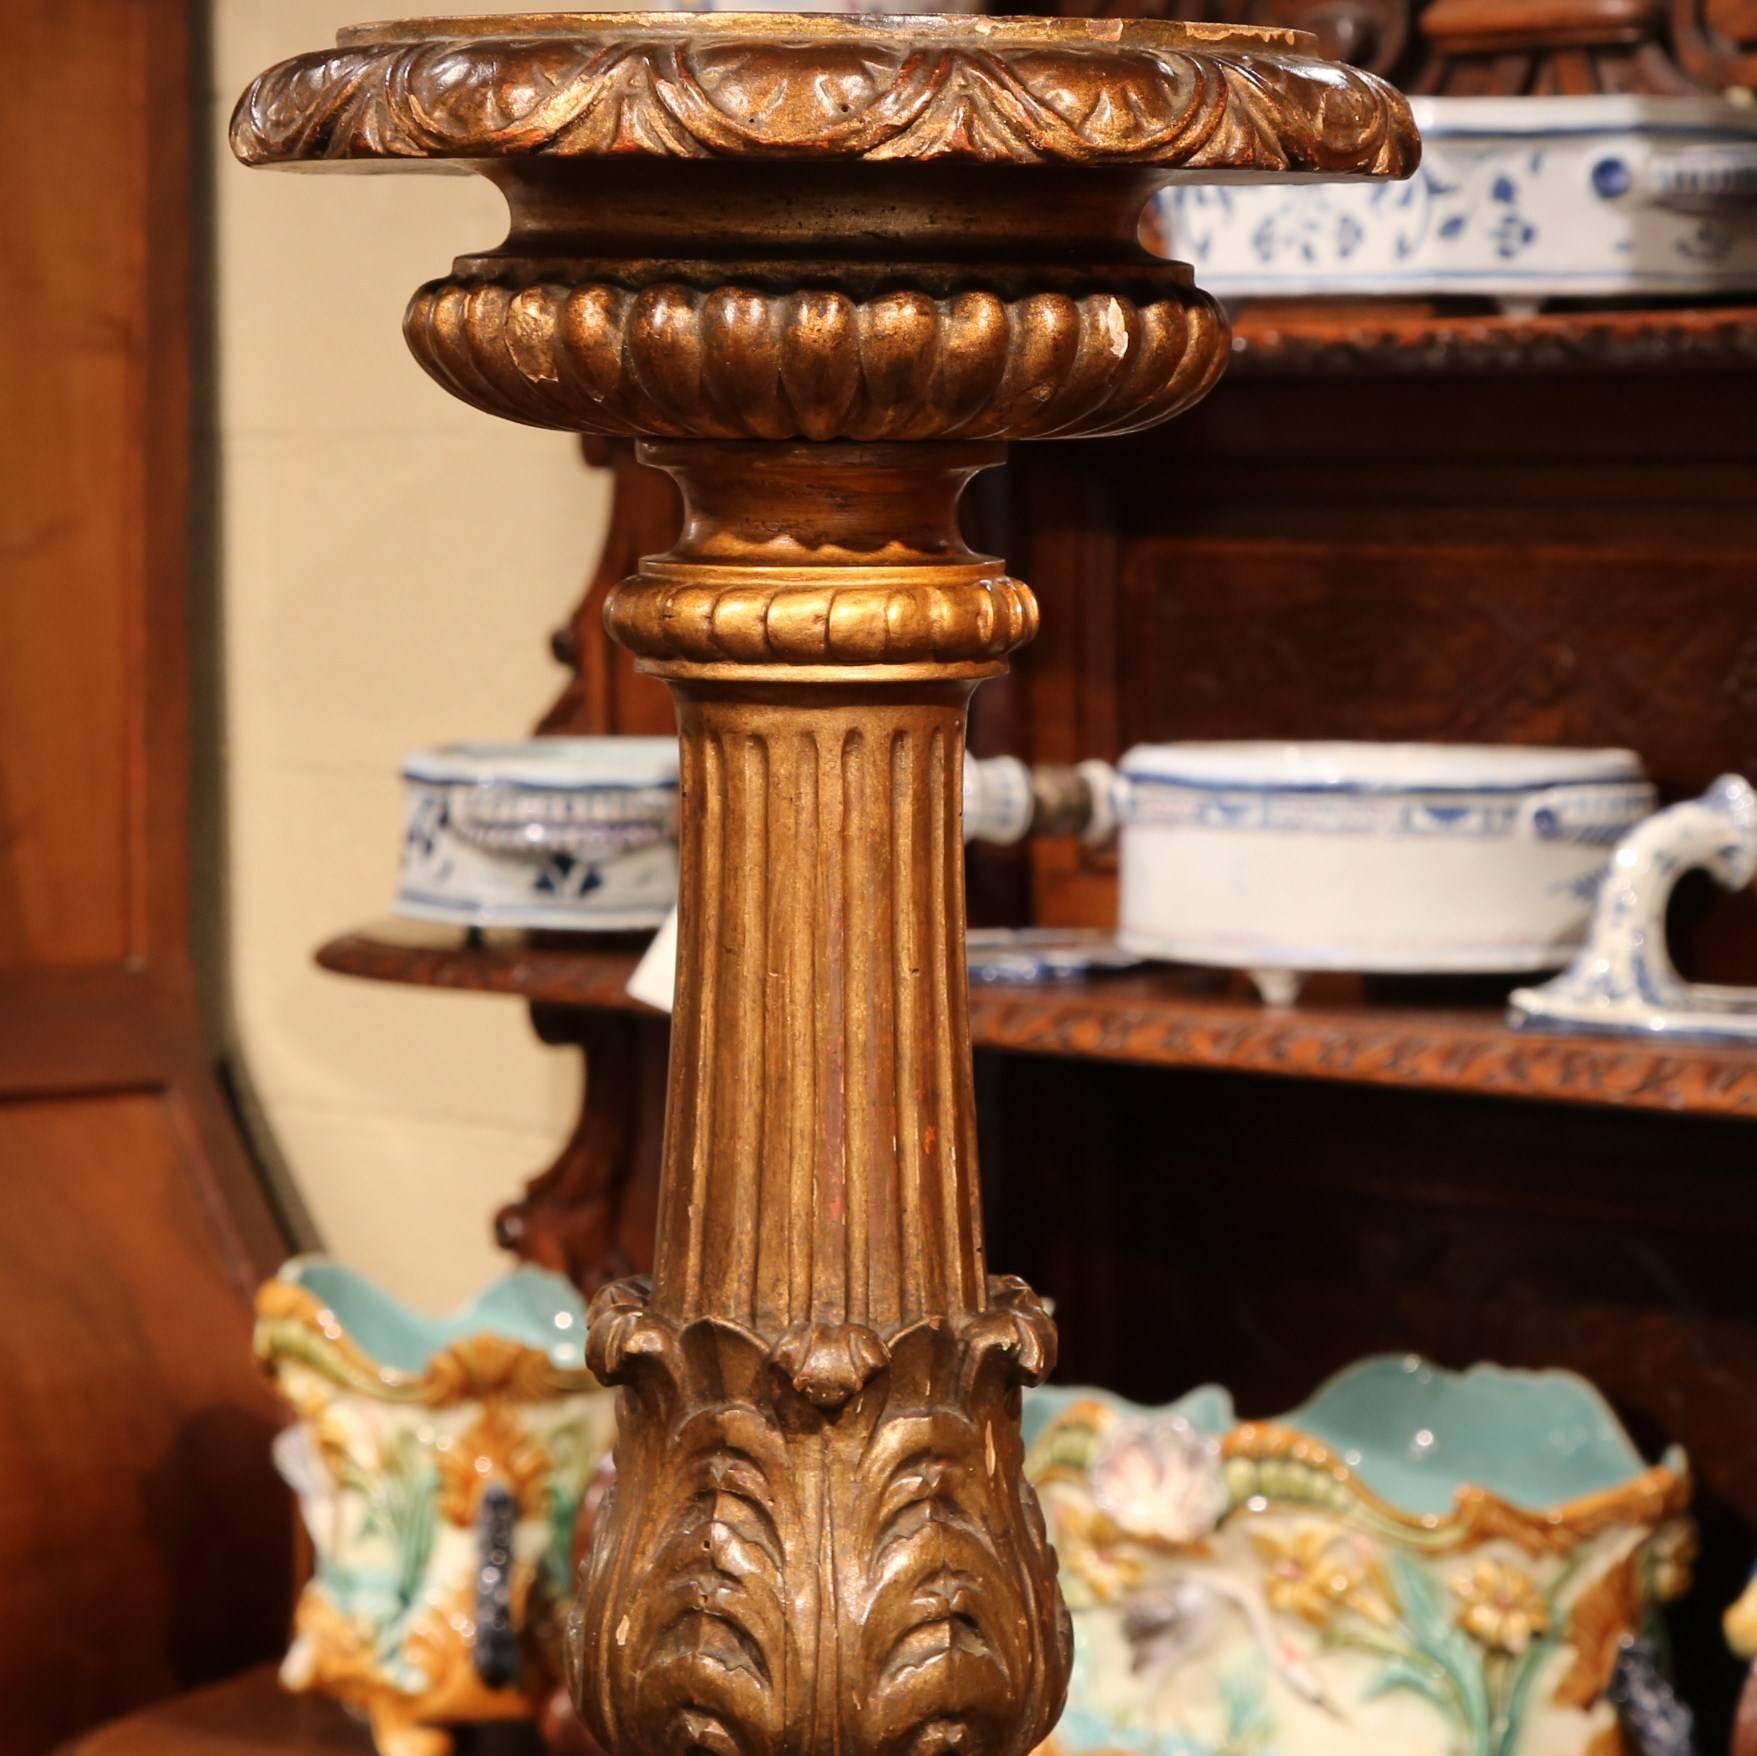 This elegant, large gilt candlestick was carved from wood in Italy, circa 1850. The candlestick has beautiful carvings all along the stem, a large diameter plate at the top, and three paw feet at the base. The candleholder is in excellent condition